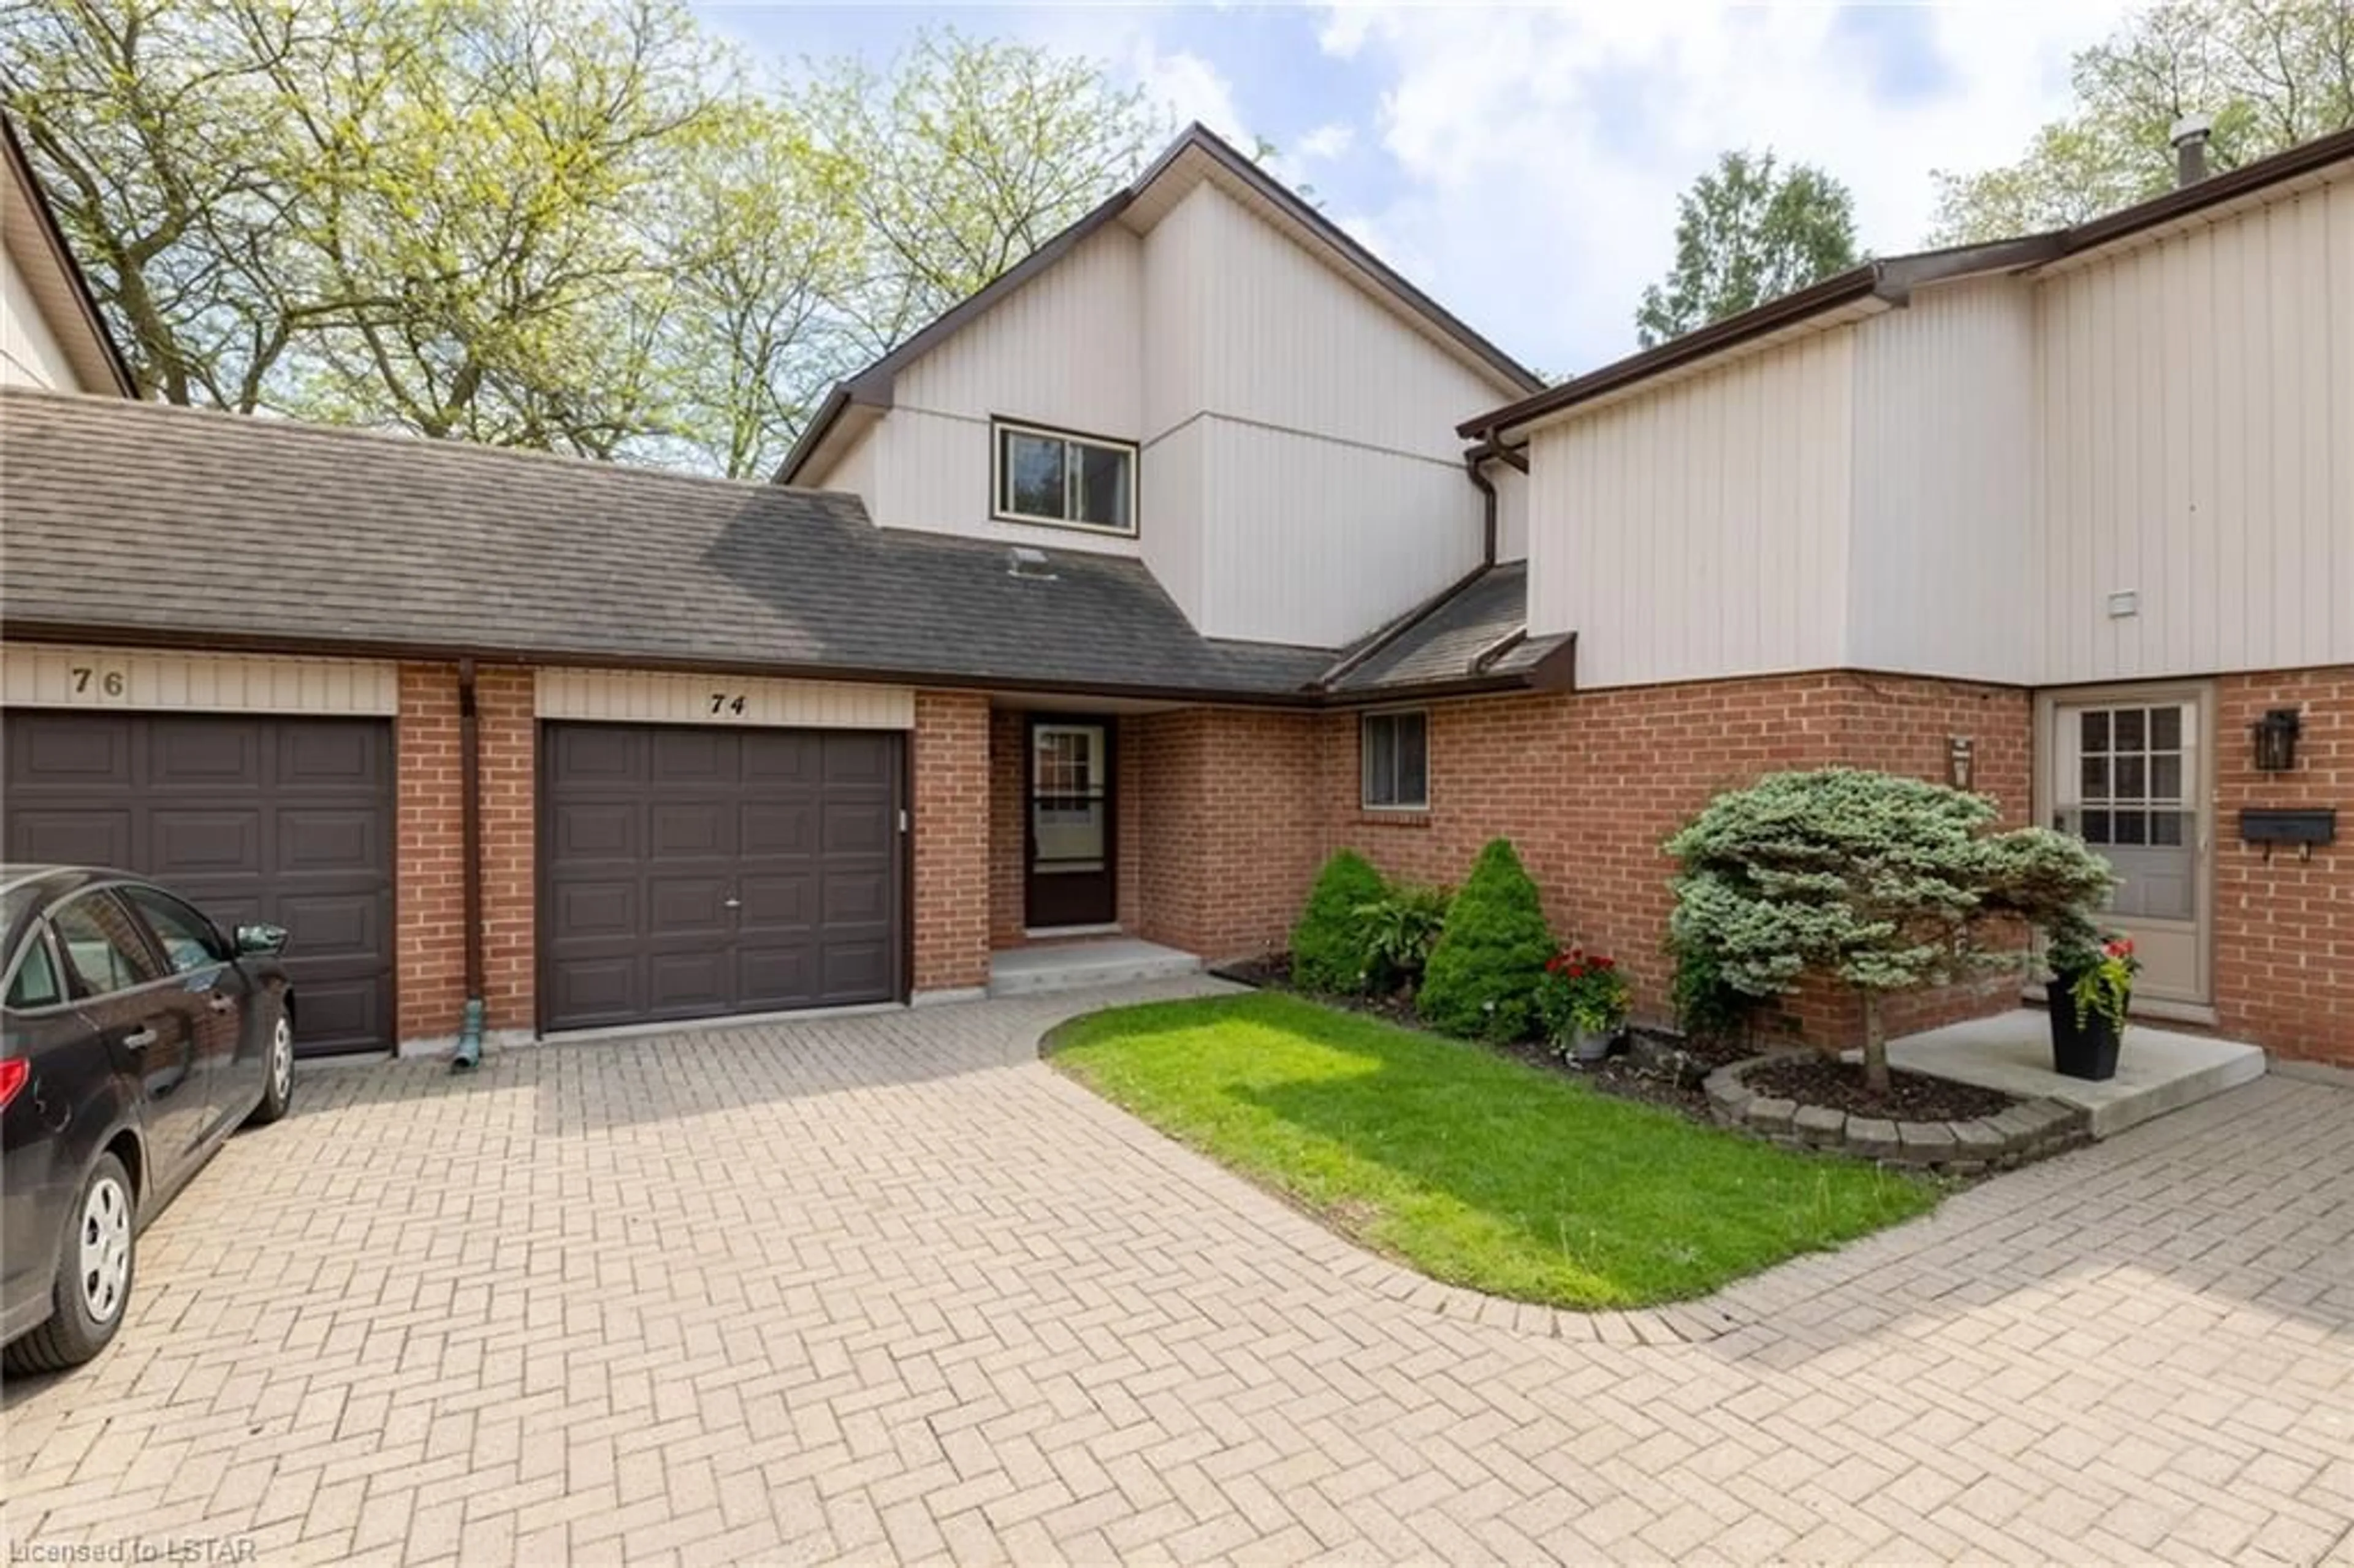 Home with brick exterior material for 971 Adelaide St #74, London Ontario N6E 2H3